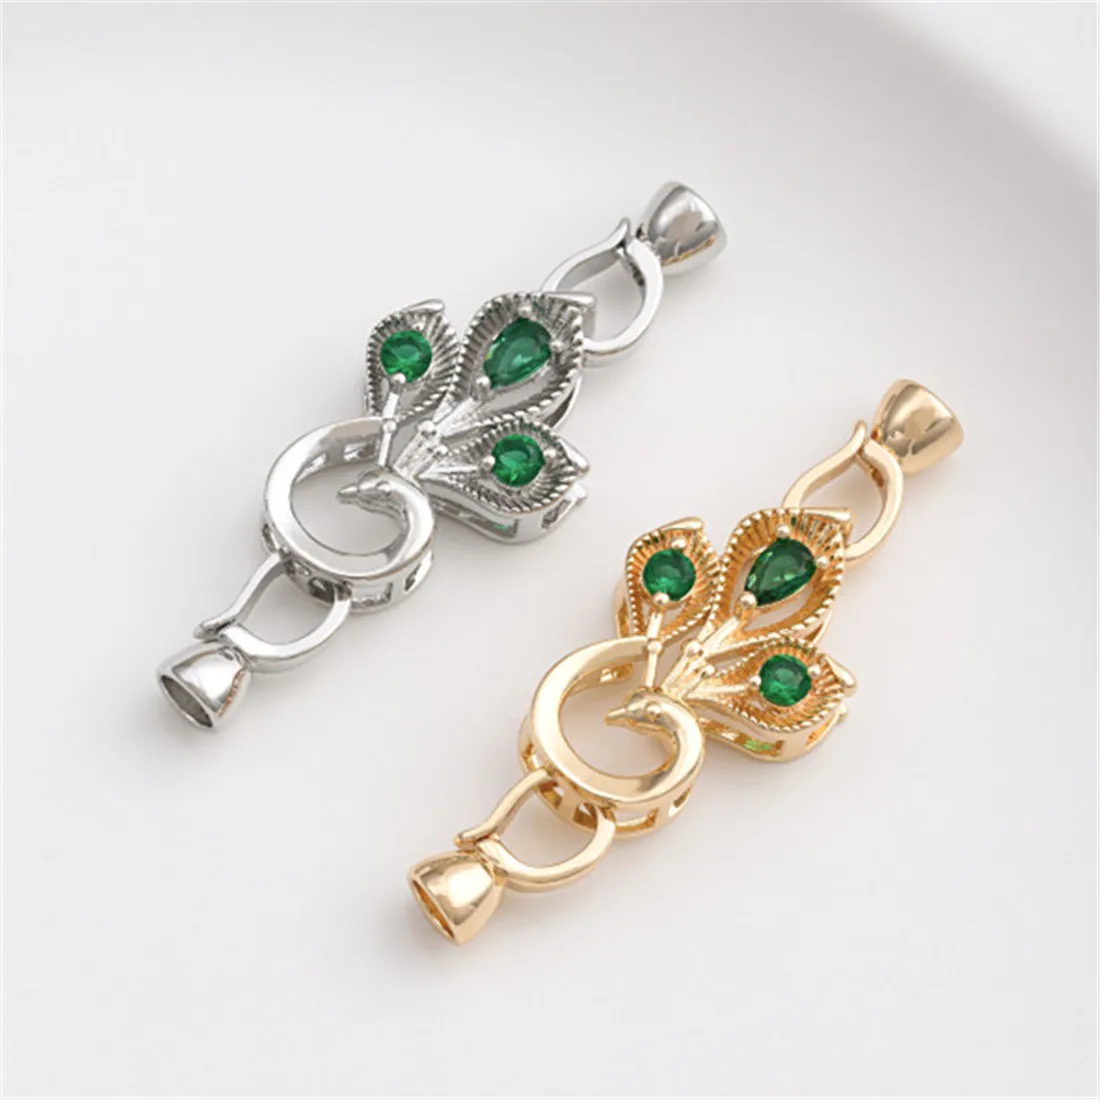 14K Gold Inlaid Green Zircon Peacock Pearl Buckle Handcrafted DIY Pearl Necklace Sweater Chain Connecting Buckle C007 real 14k gold plated accessories crown cat heart shaped ot buckle diy hand bracelet necklace jewelry connection buckle